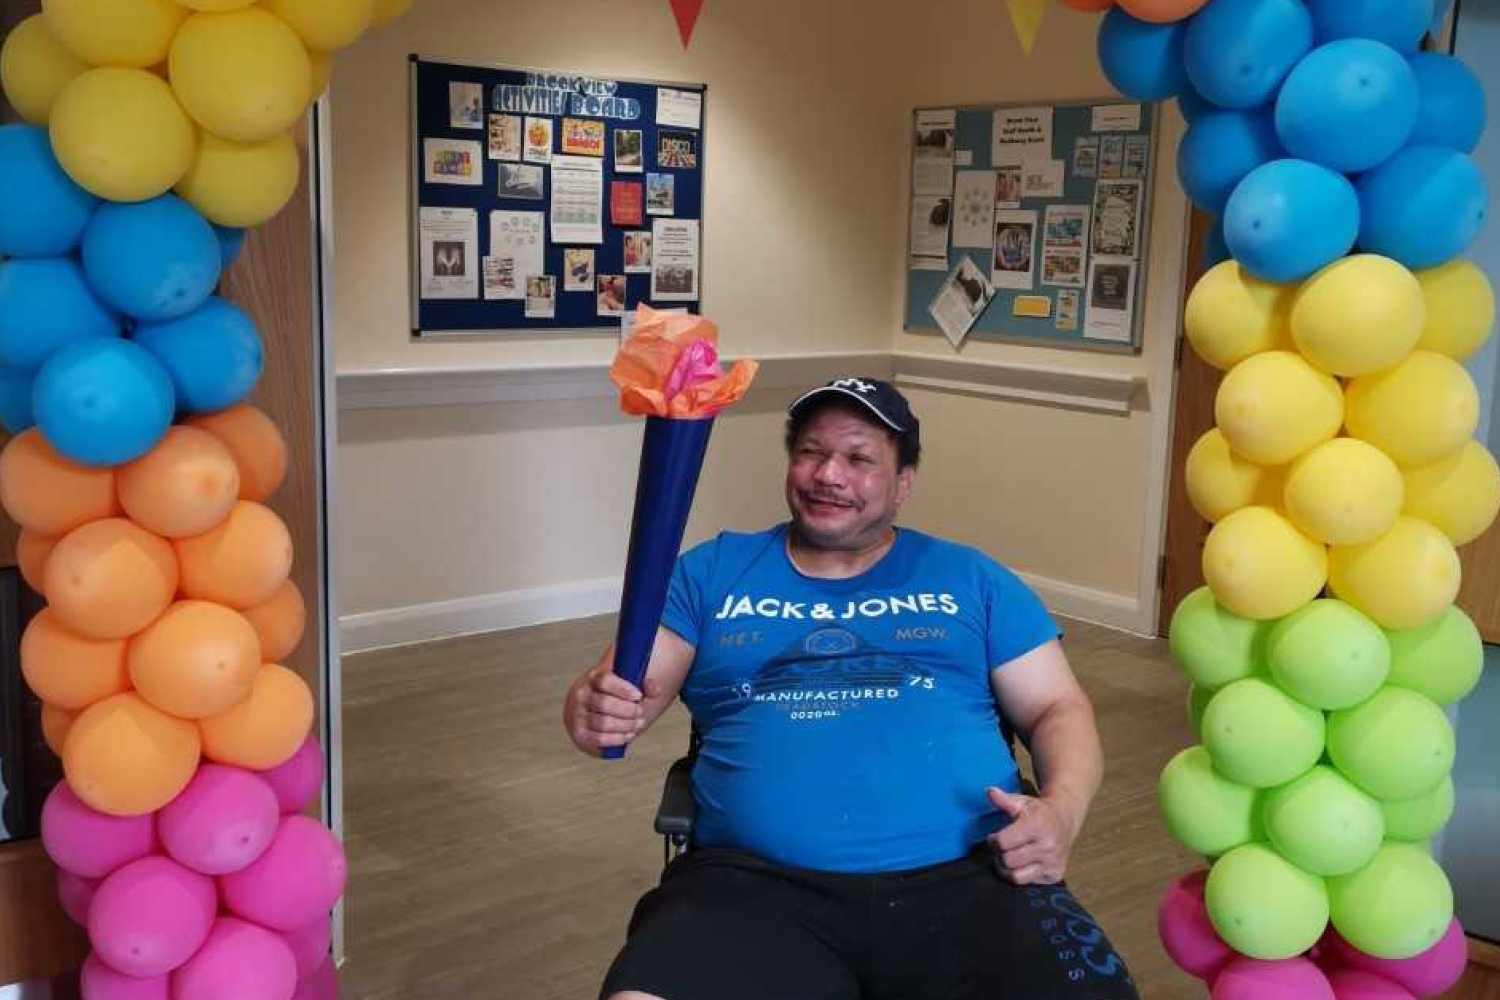 A male holding an Olympic torch under a balloon arch